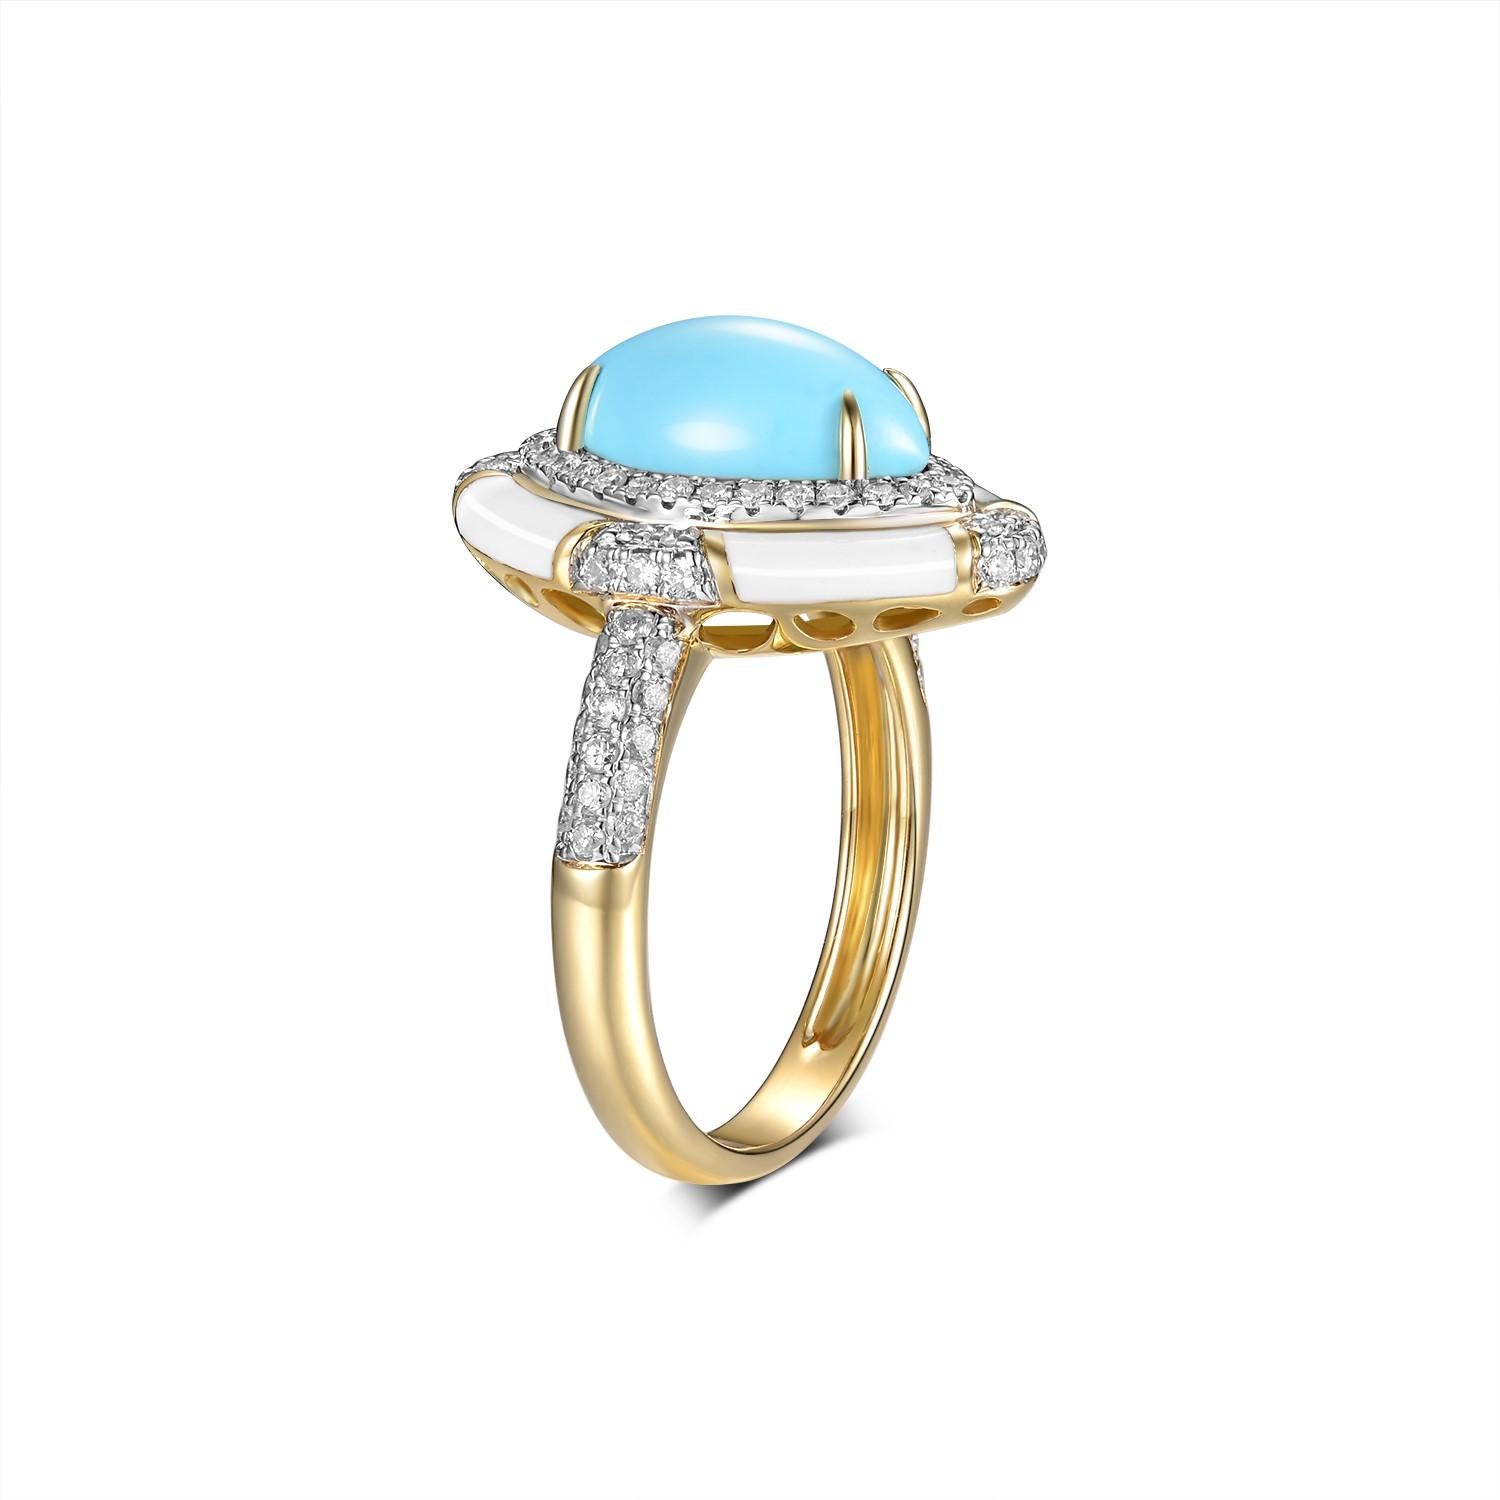 Embrace timeless elegance with our marquise-cut Sleeping Beauty turquoise ring, showcasing a substantial 2.08 carat centerpiece. Esteemed for its pristine, solid light blue shade without any matrix, each turquoise is diligently sourced from the